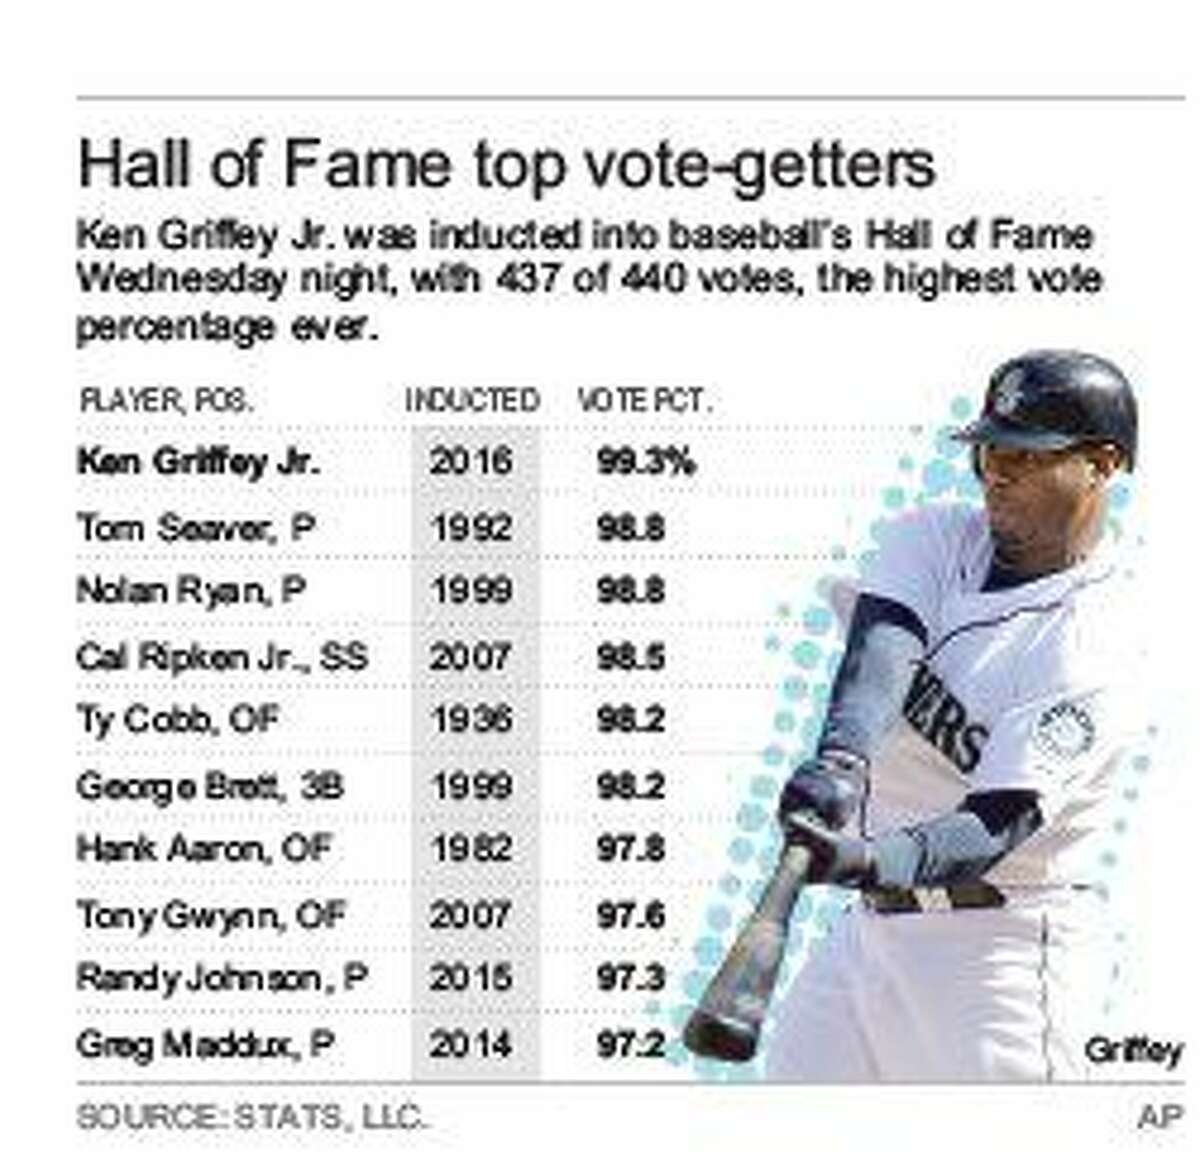 Ken Griffey Jr. and Mike Piazza inducted into Hall of Fame, Sports